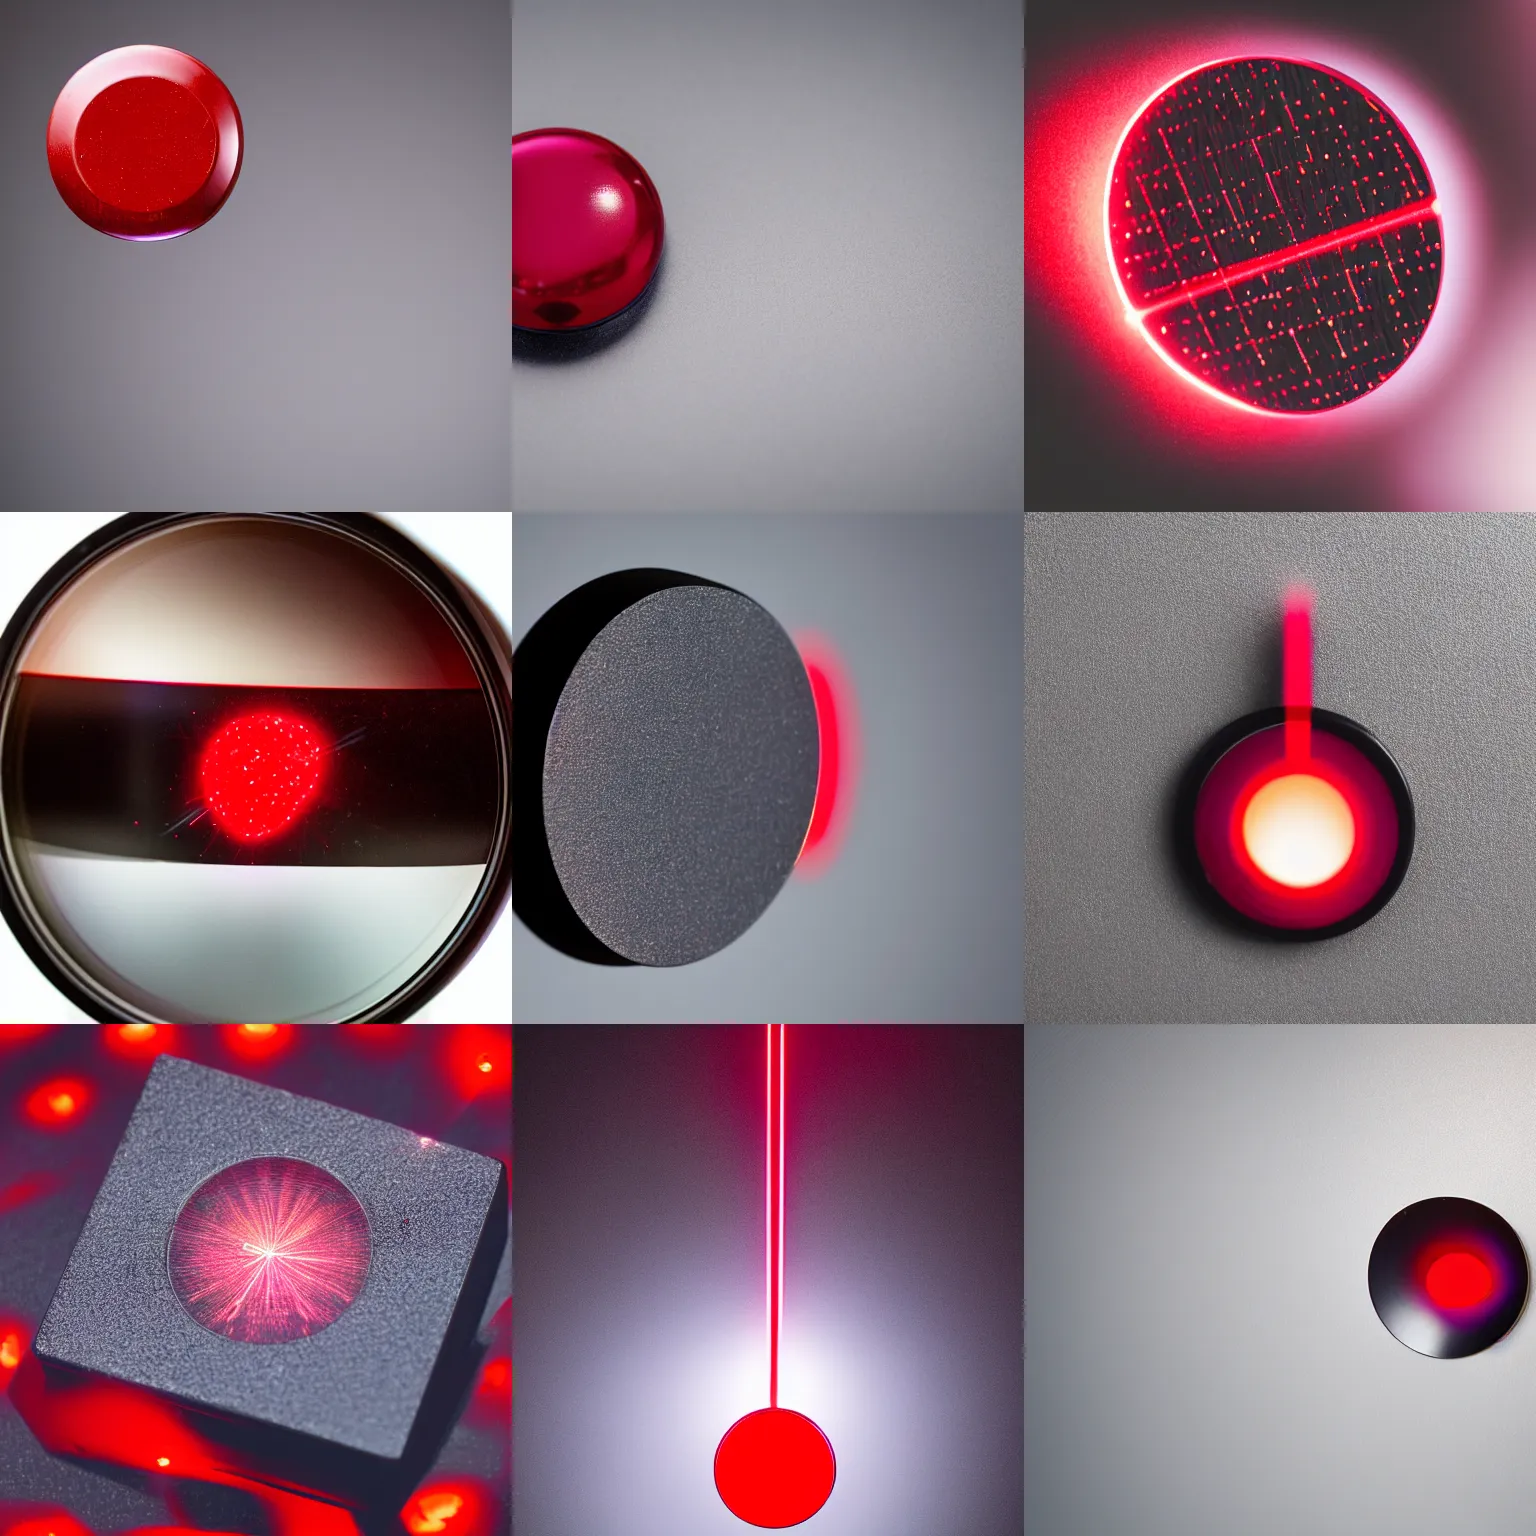 Prompt: A studio photograph of a magnet suspended by a thin red laser, XF IQ4, 150MP, 50mm, F1.4, ISO 200, 1/160s, natural light, Adobe Lightroom, photolab, Affinity Photo, PhotoDirector 365